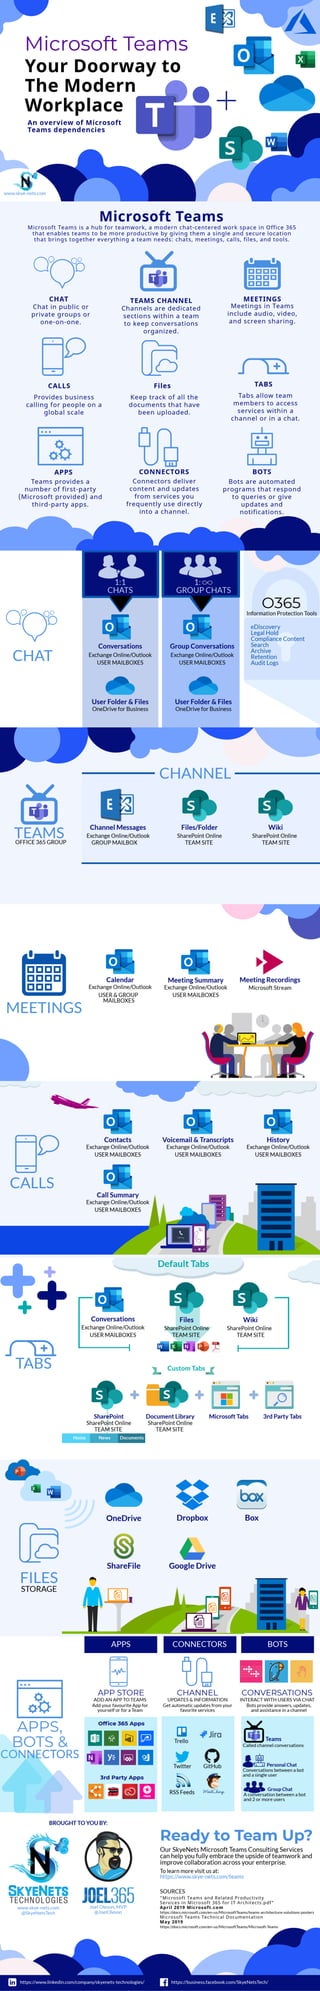 Microsoft Teams Doorway to the Modern Workplace Infographic